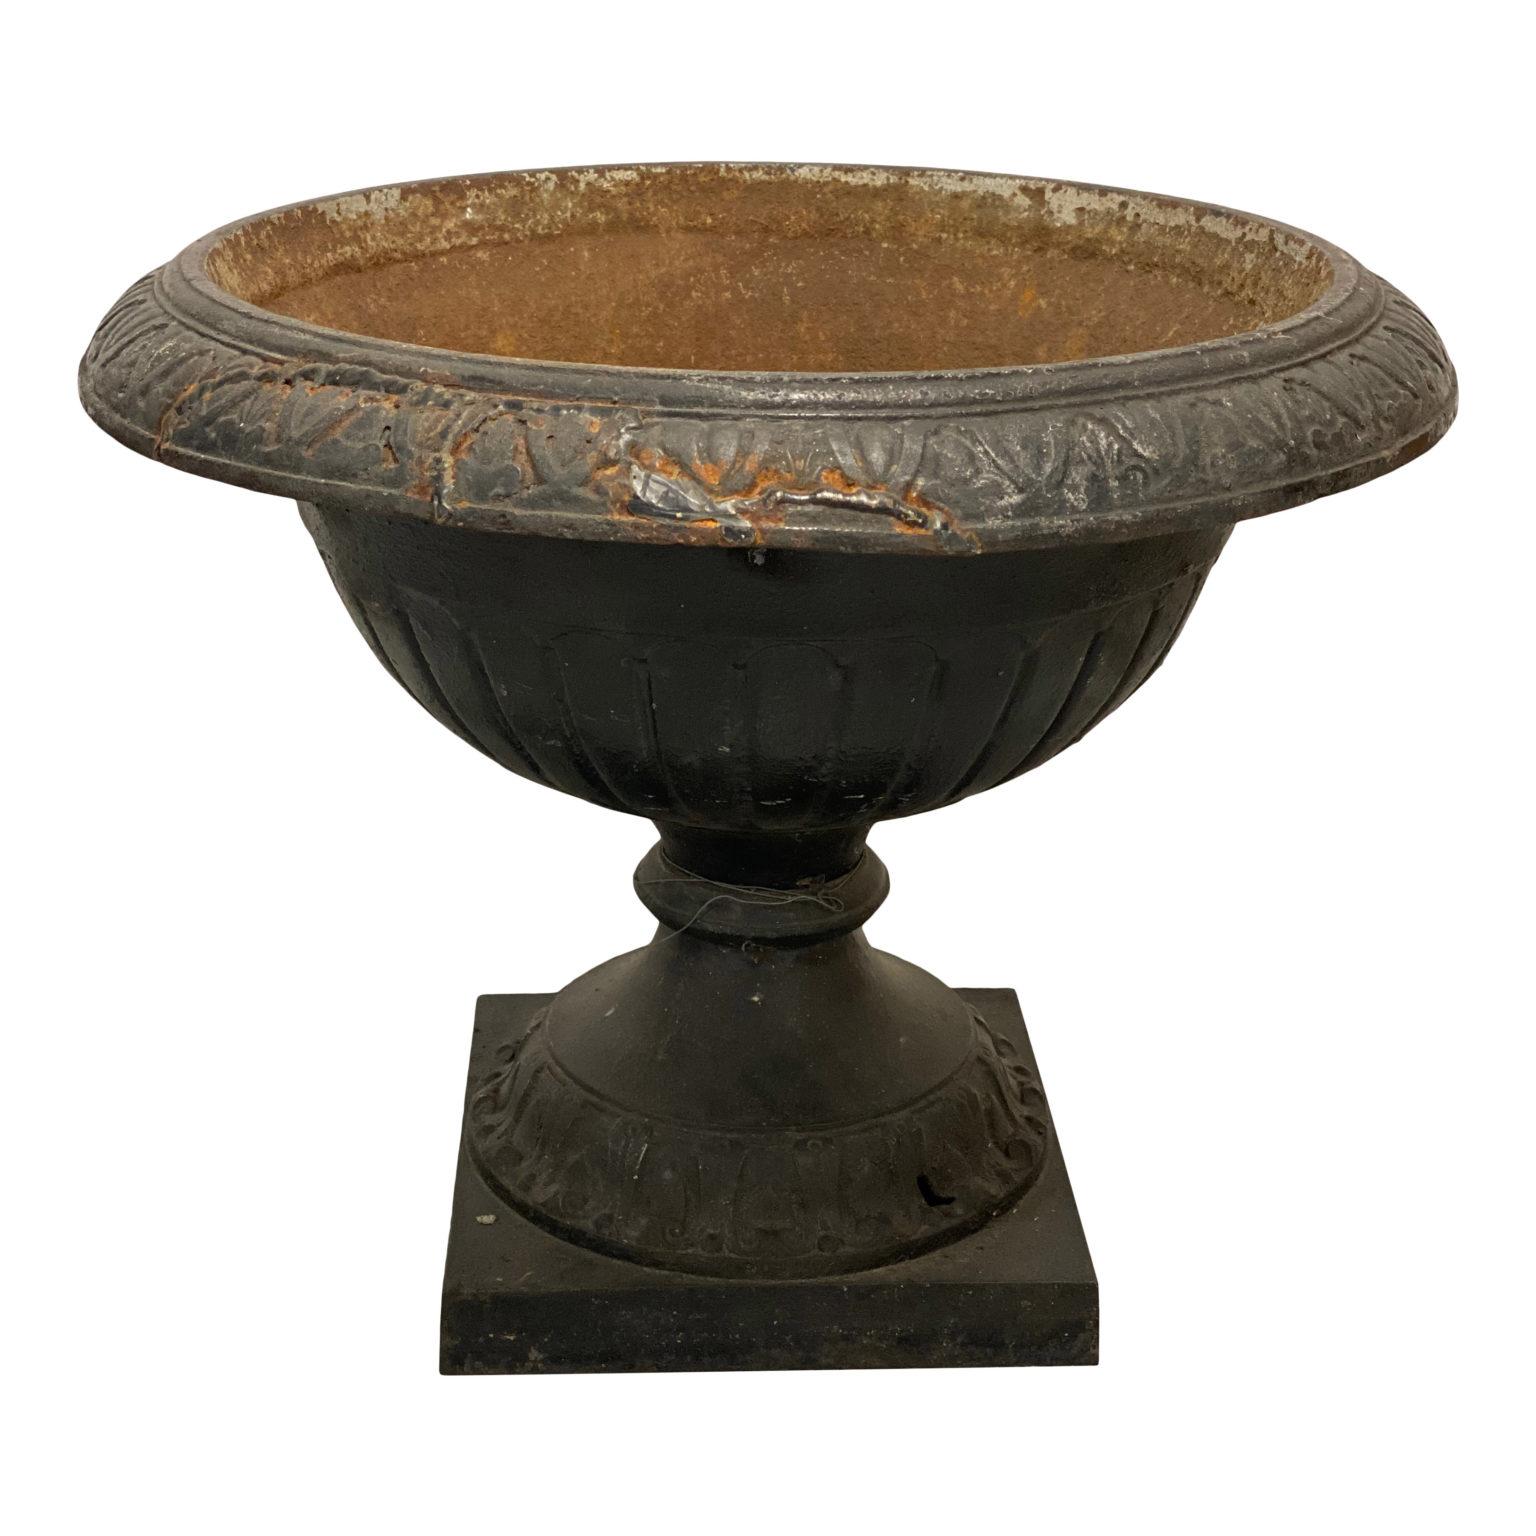 Antique Neoclassical Cast Iron Urn In Good Condition For Sale In Sag Harbor, NY